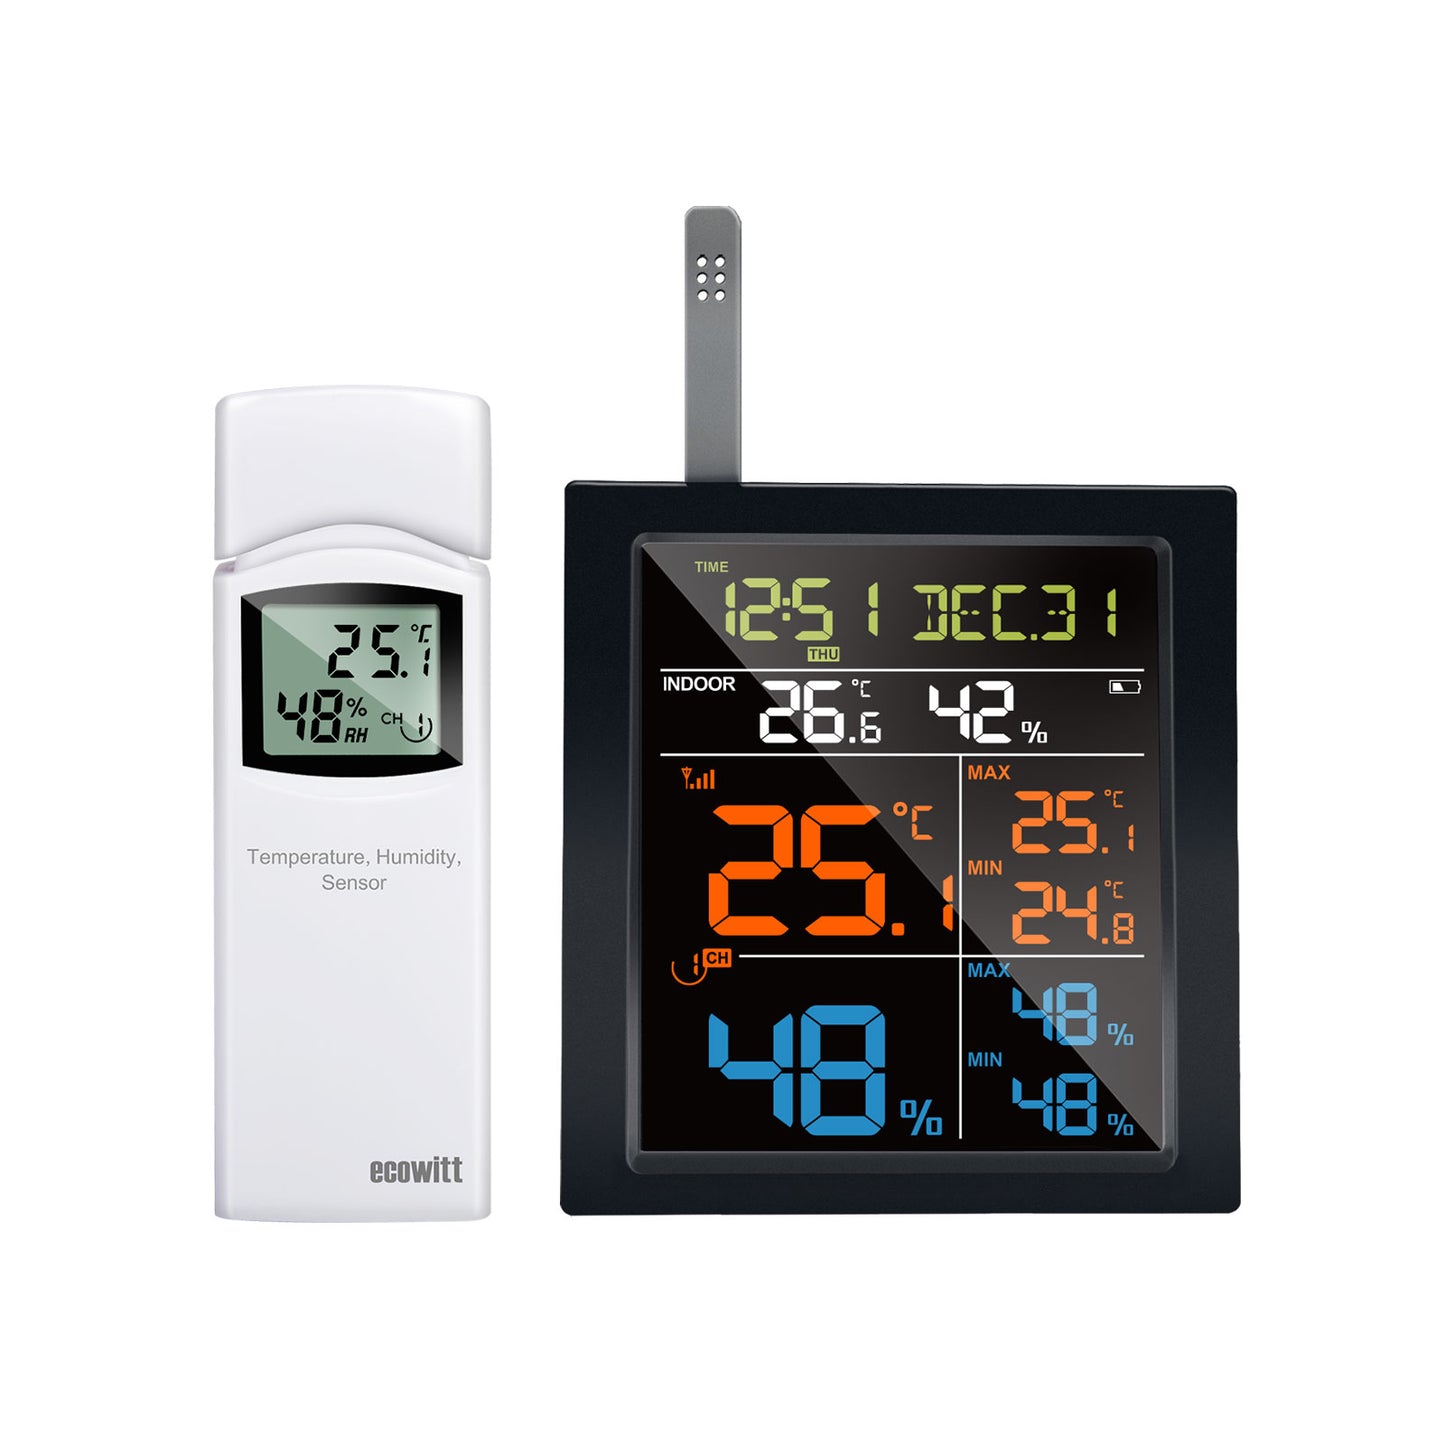 WN1820 IOT Wi-Fi Weather Station with 4.9" LCD Display and WN31(WH31) Multi-Channel Temperature/Humidity Sensor